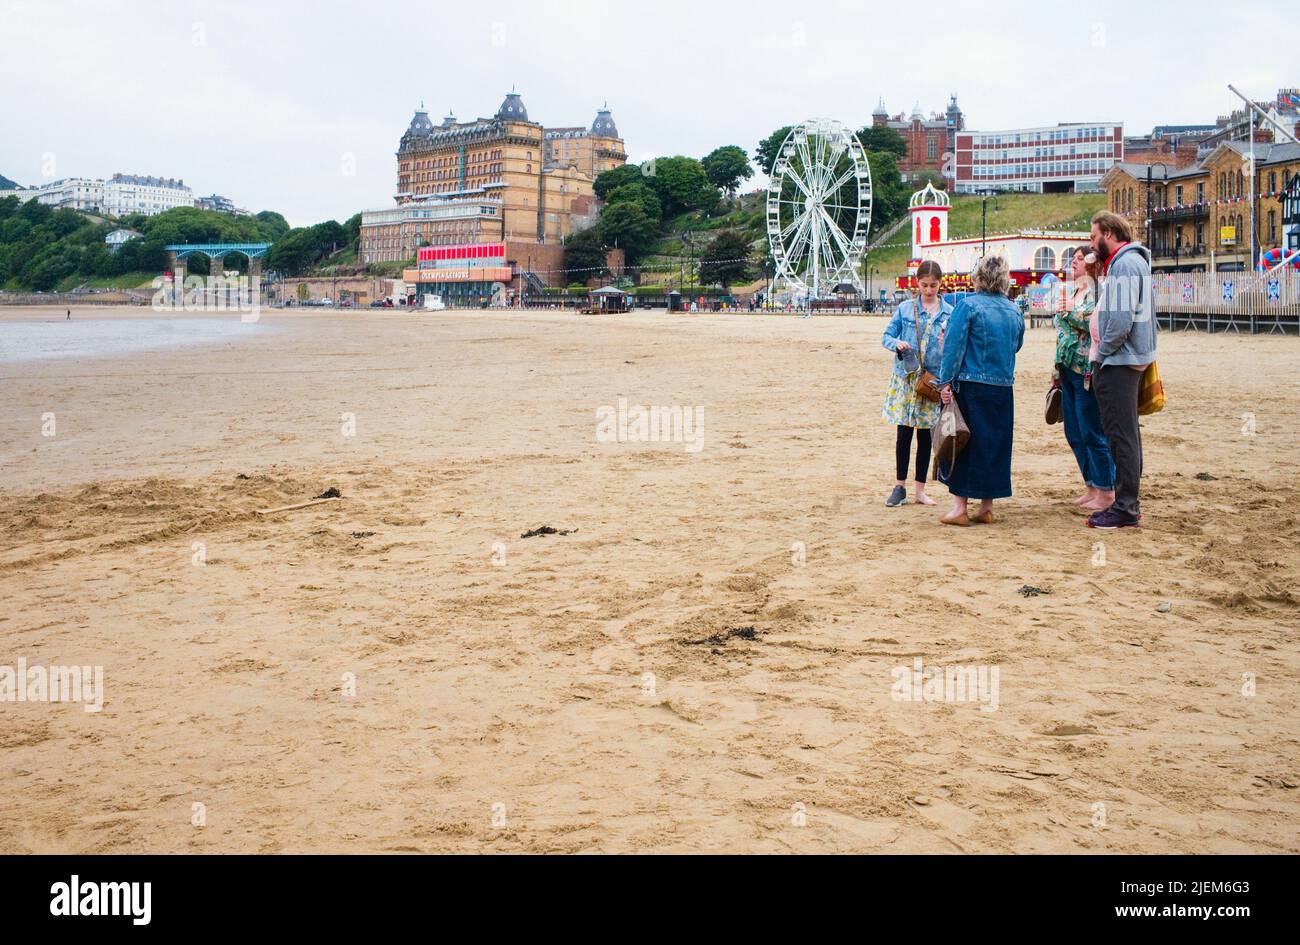 Family eating ice creams on the beach at Scarborough during a weekday evening when it is relatively quiet Stock Photo